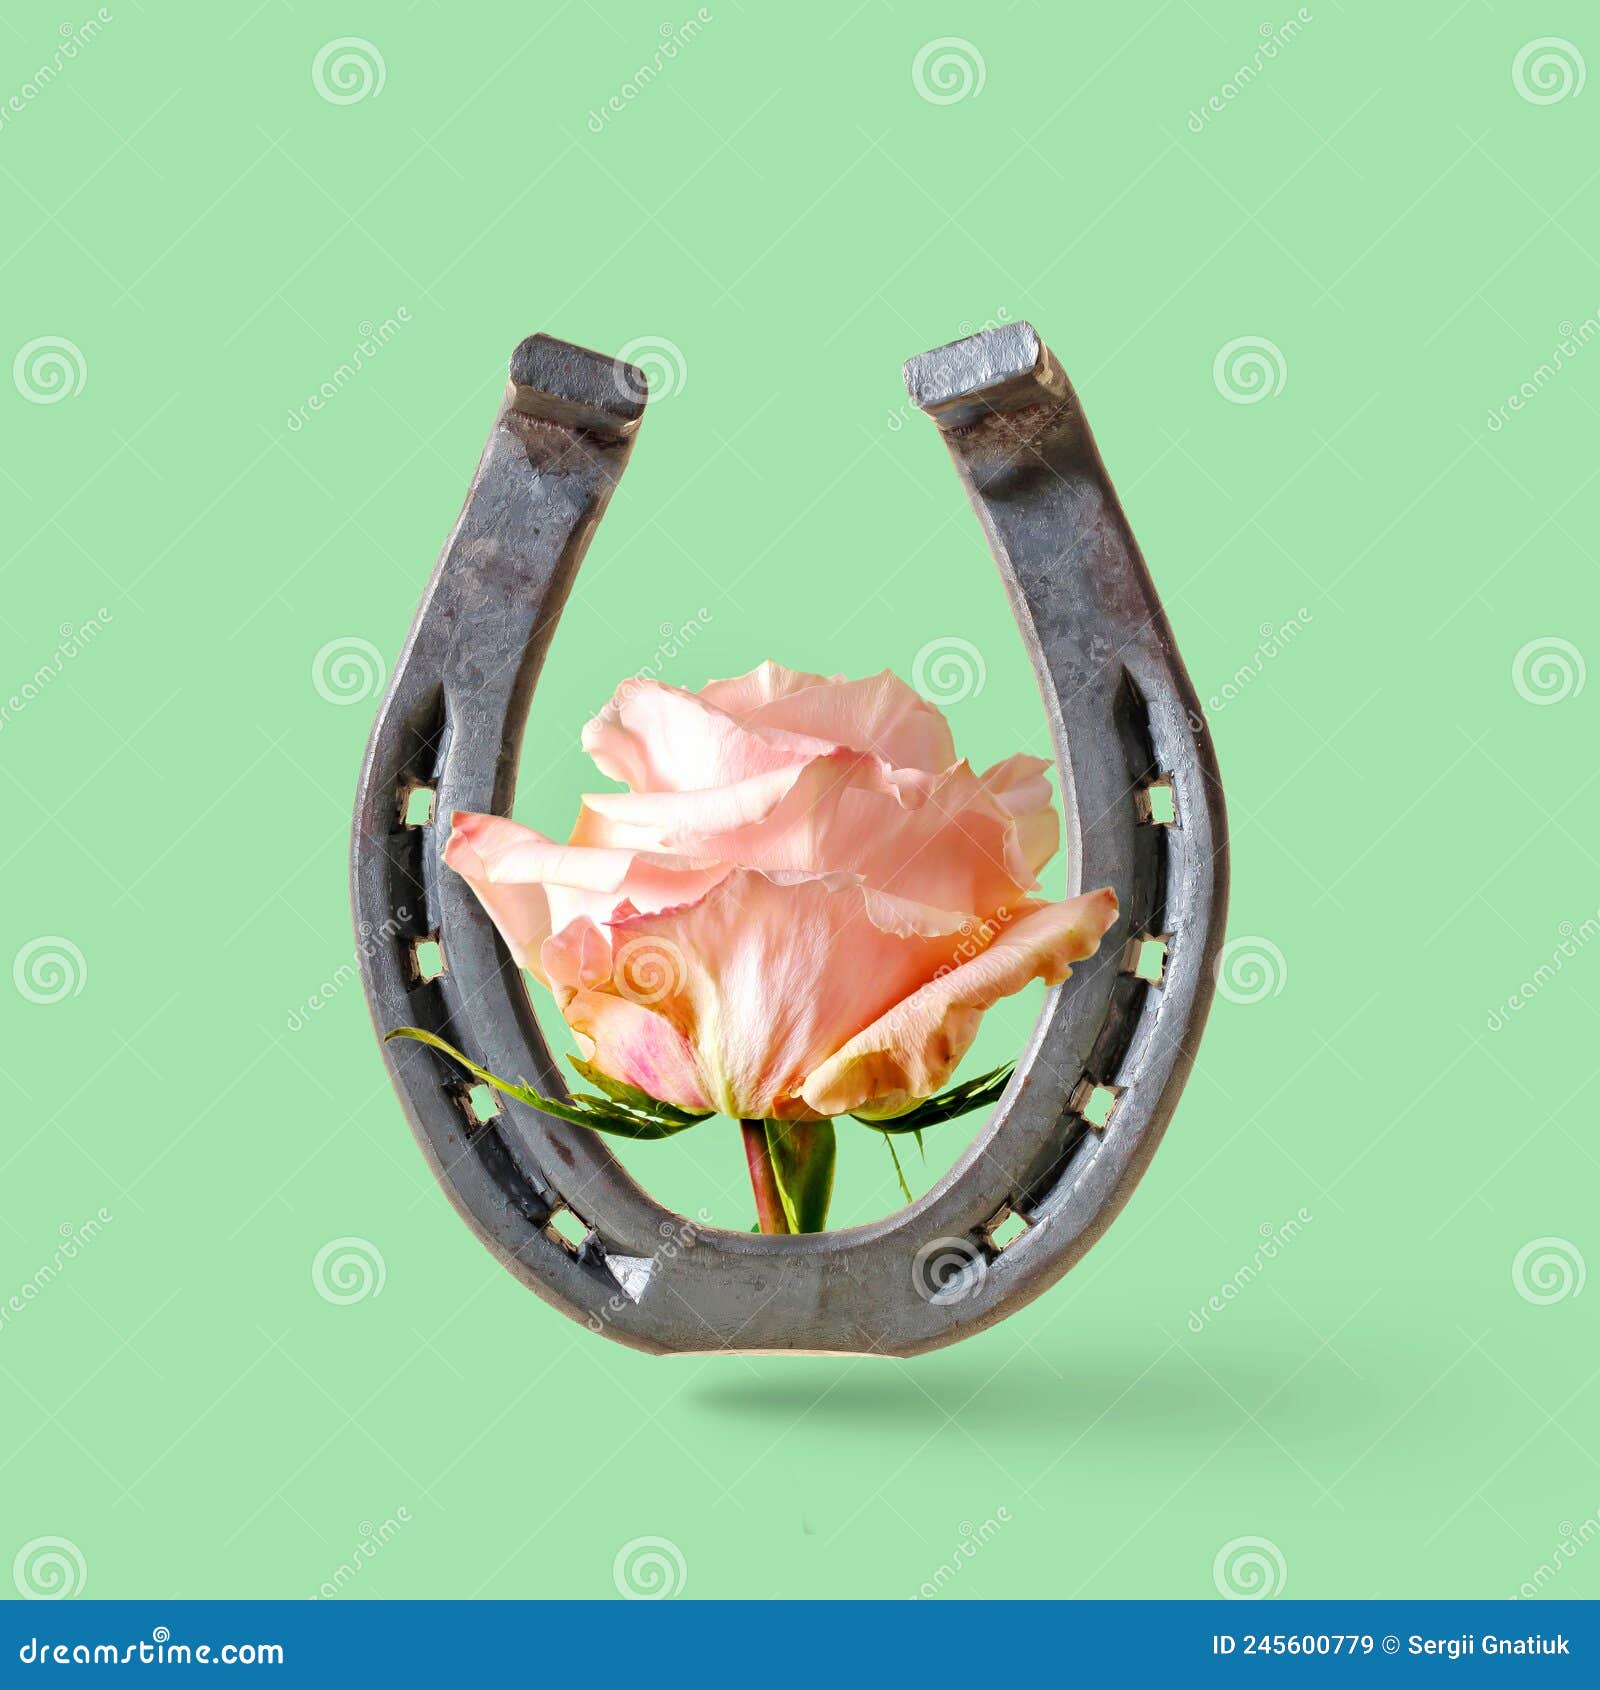 rose flower and horseshoe on a green background.